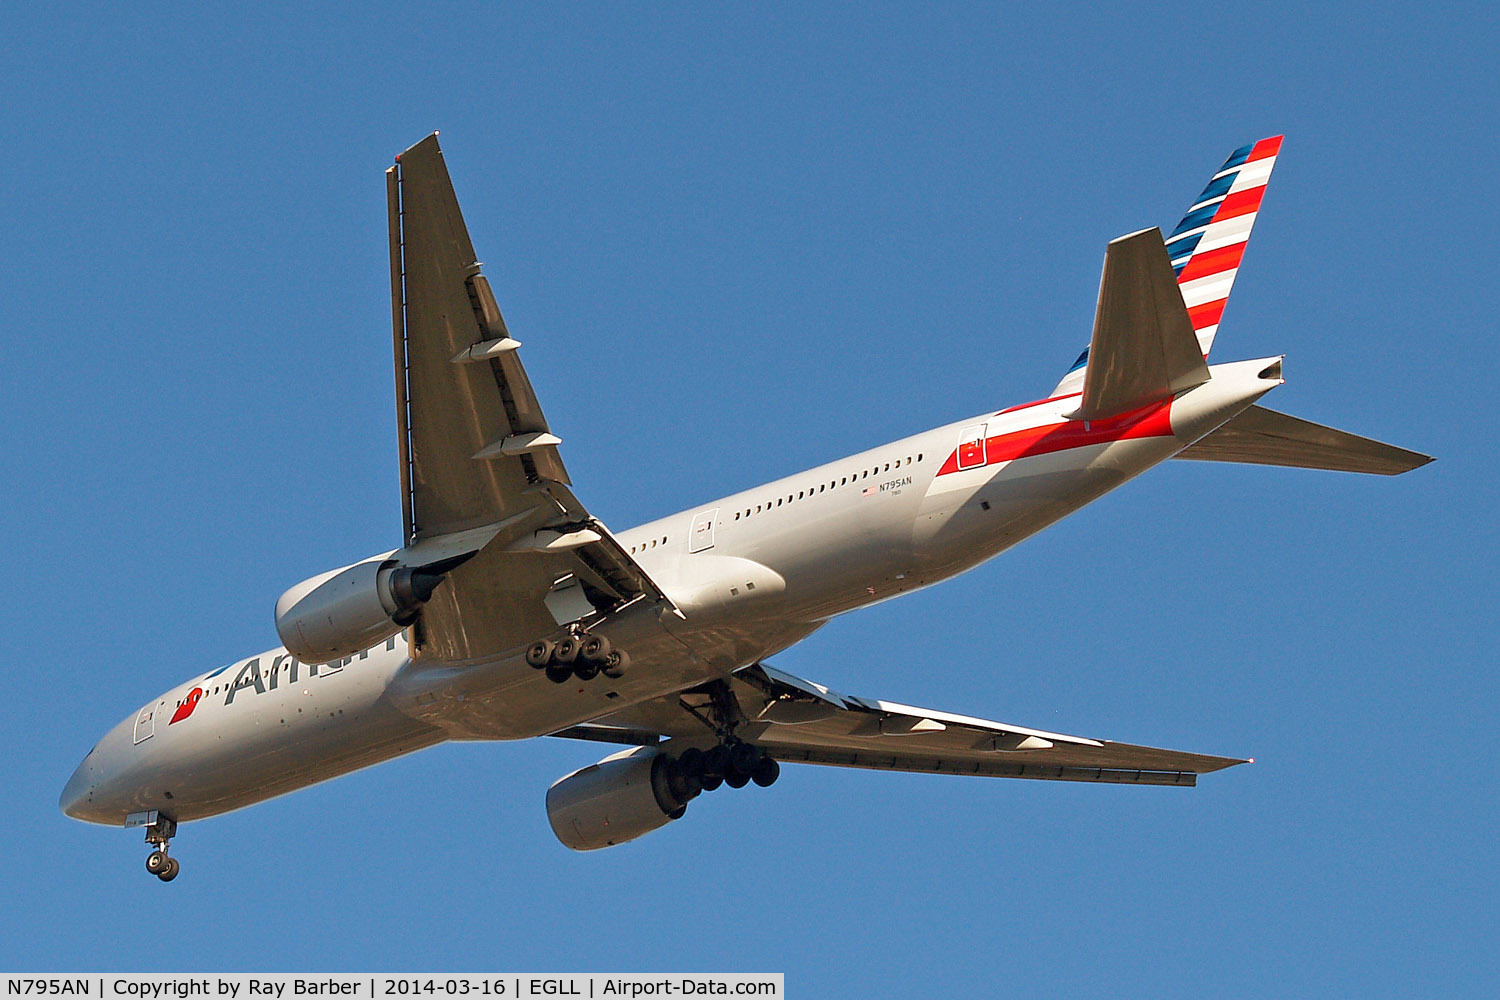 N795AN, 2000 Boeing 777-223 C/N 30257, Boeing 777-223ER [30257] (American Airlines) Home~G 16/03/2014. On approach 27R.